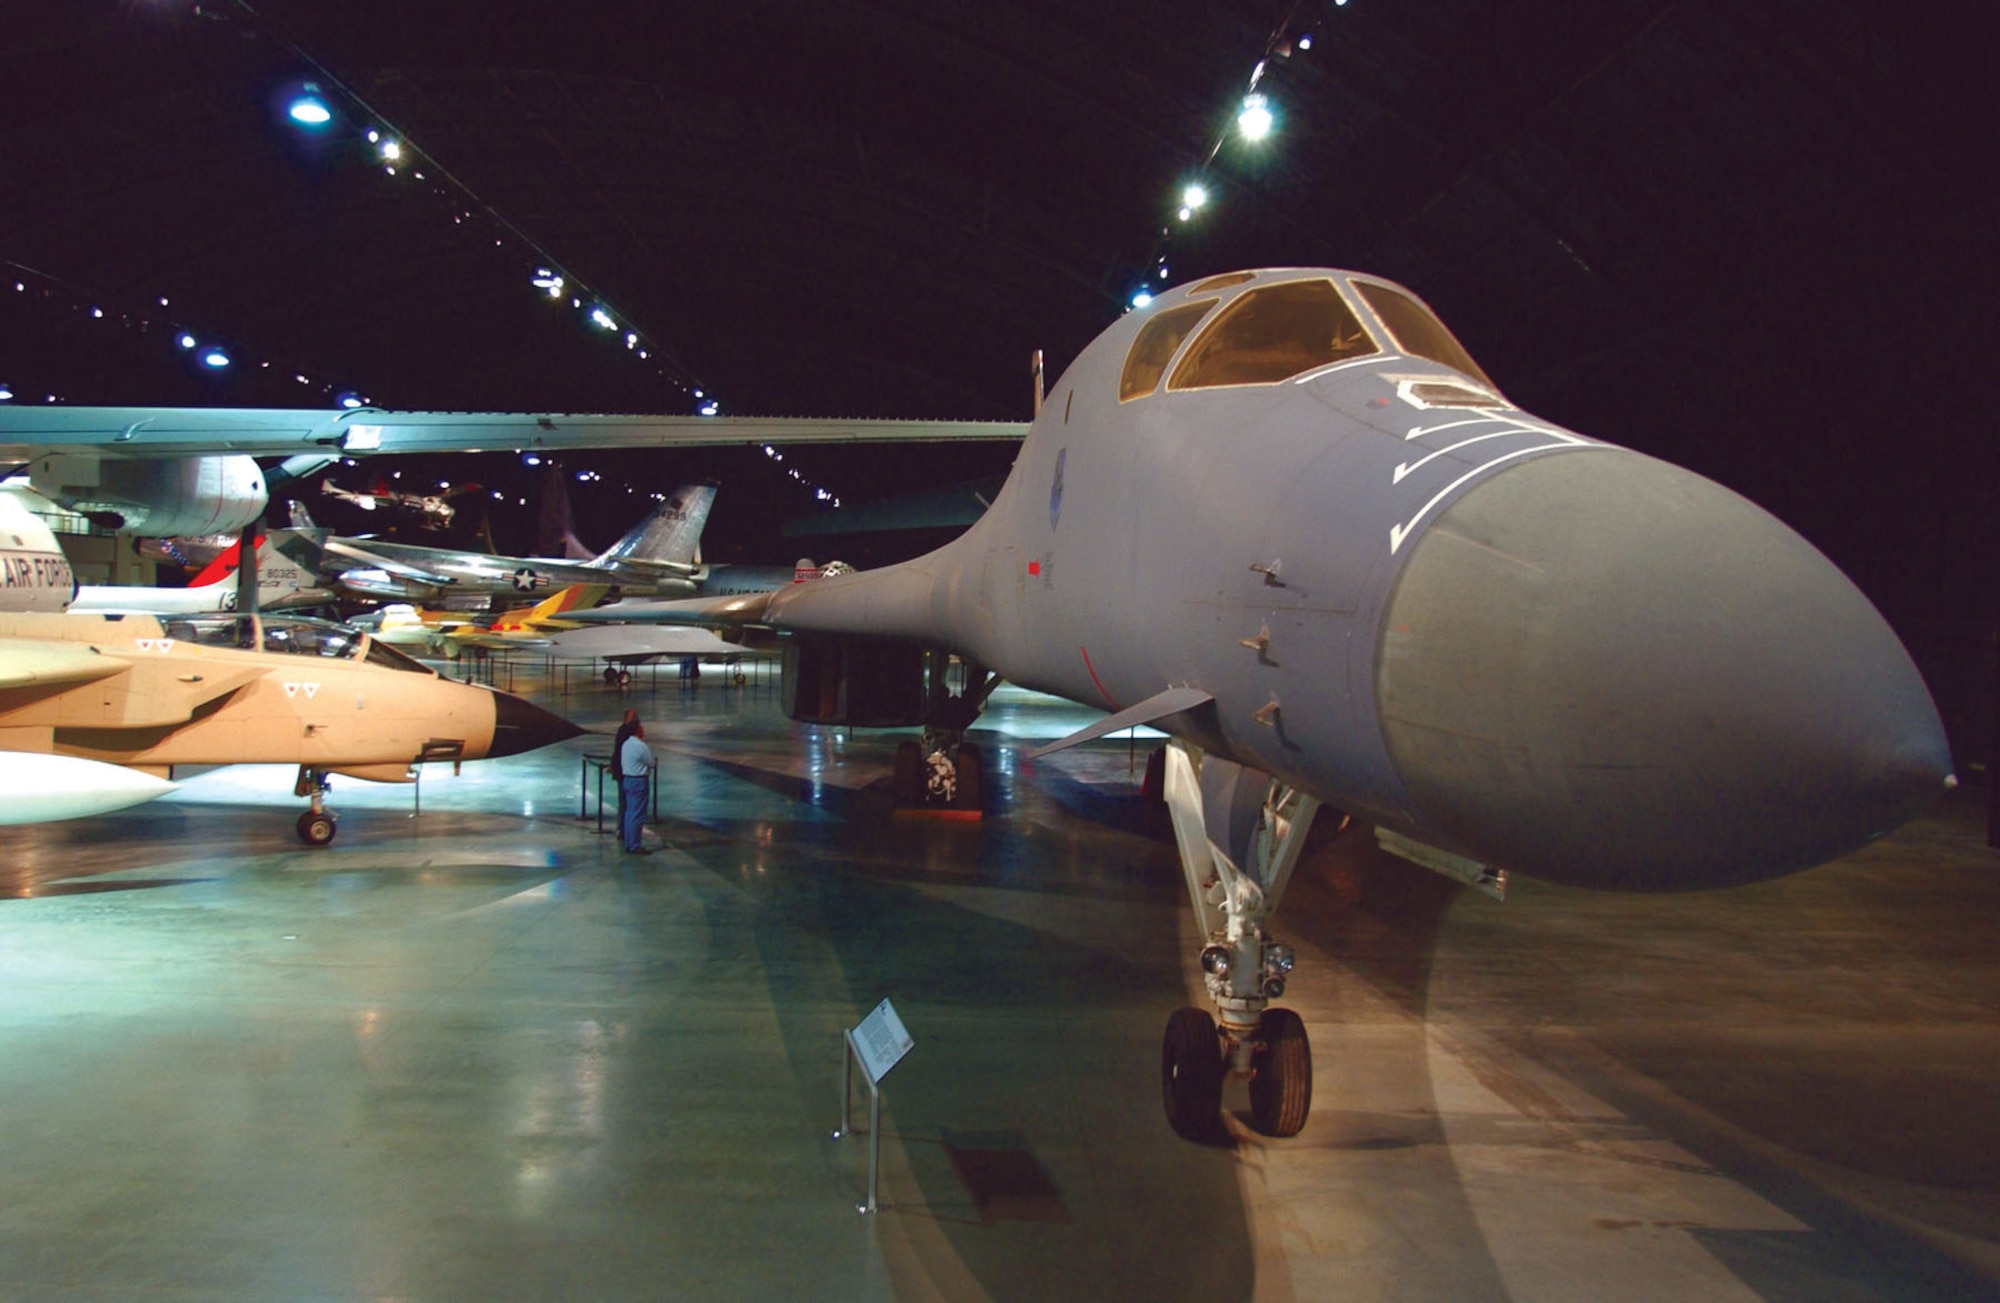 DAYTON, Ohio -- Boeing B-1B Lancer in the Cold War Gallery at the National Museum of the United States Air Force. (U.S. Air Force photo)